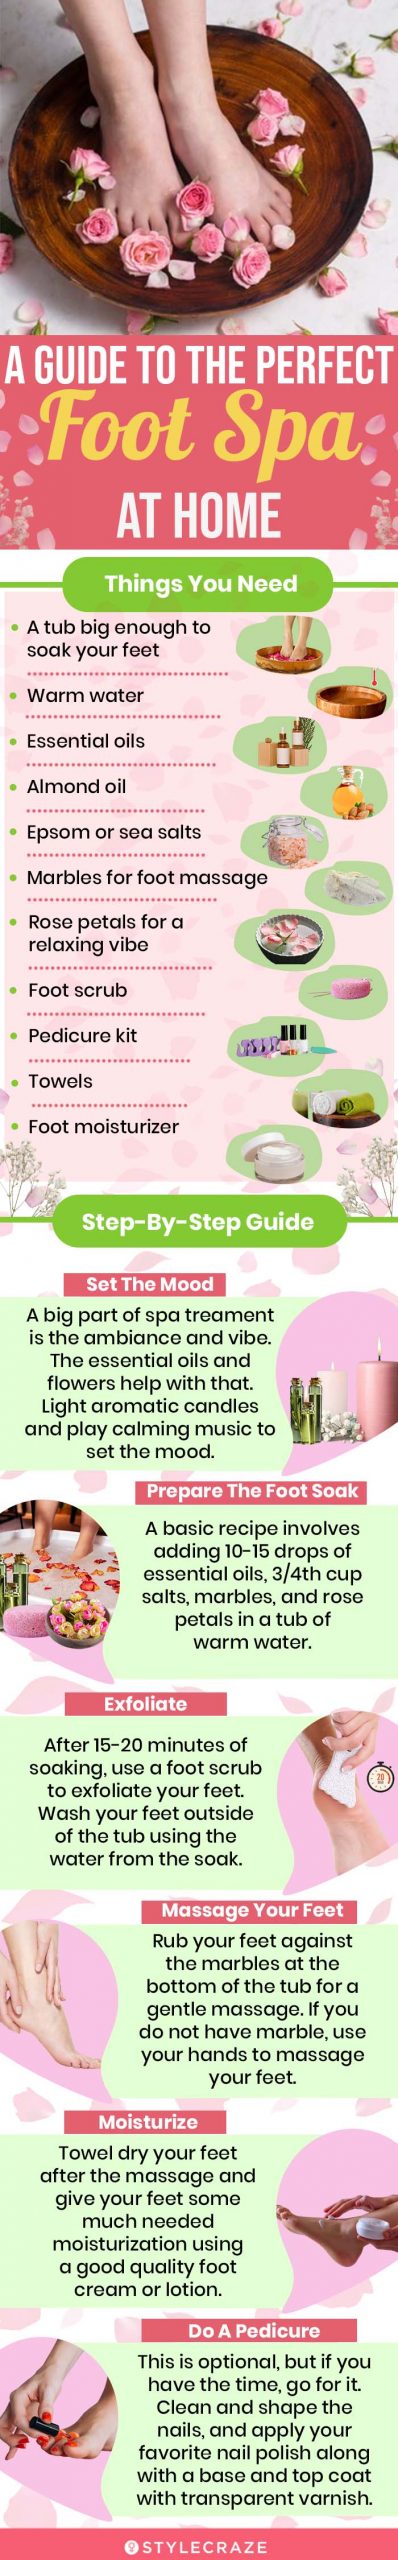 https://cdn2.stylecraze.com/wp-content/uploads/2023/02/A-Guide-To-The-Perfect-Foot-Spa-At-Homes-scaled.jpg